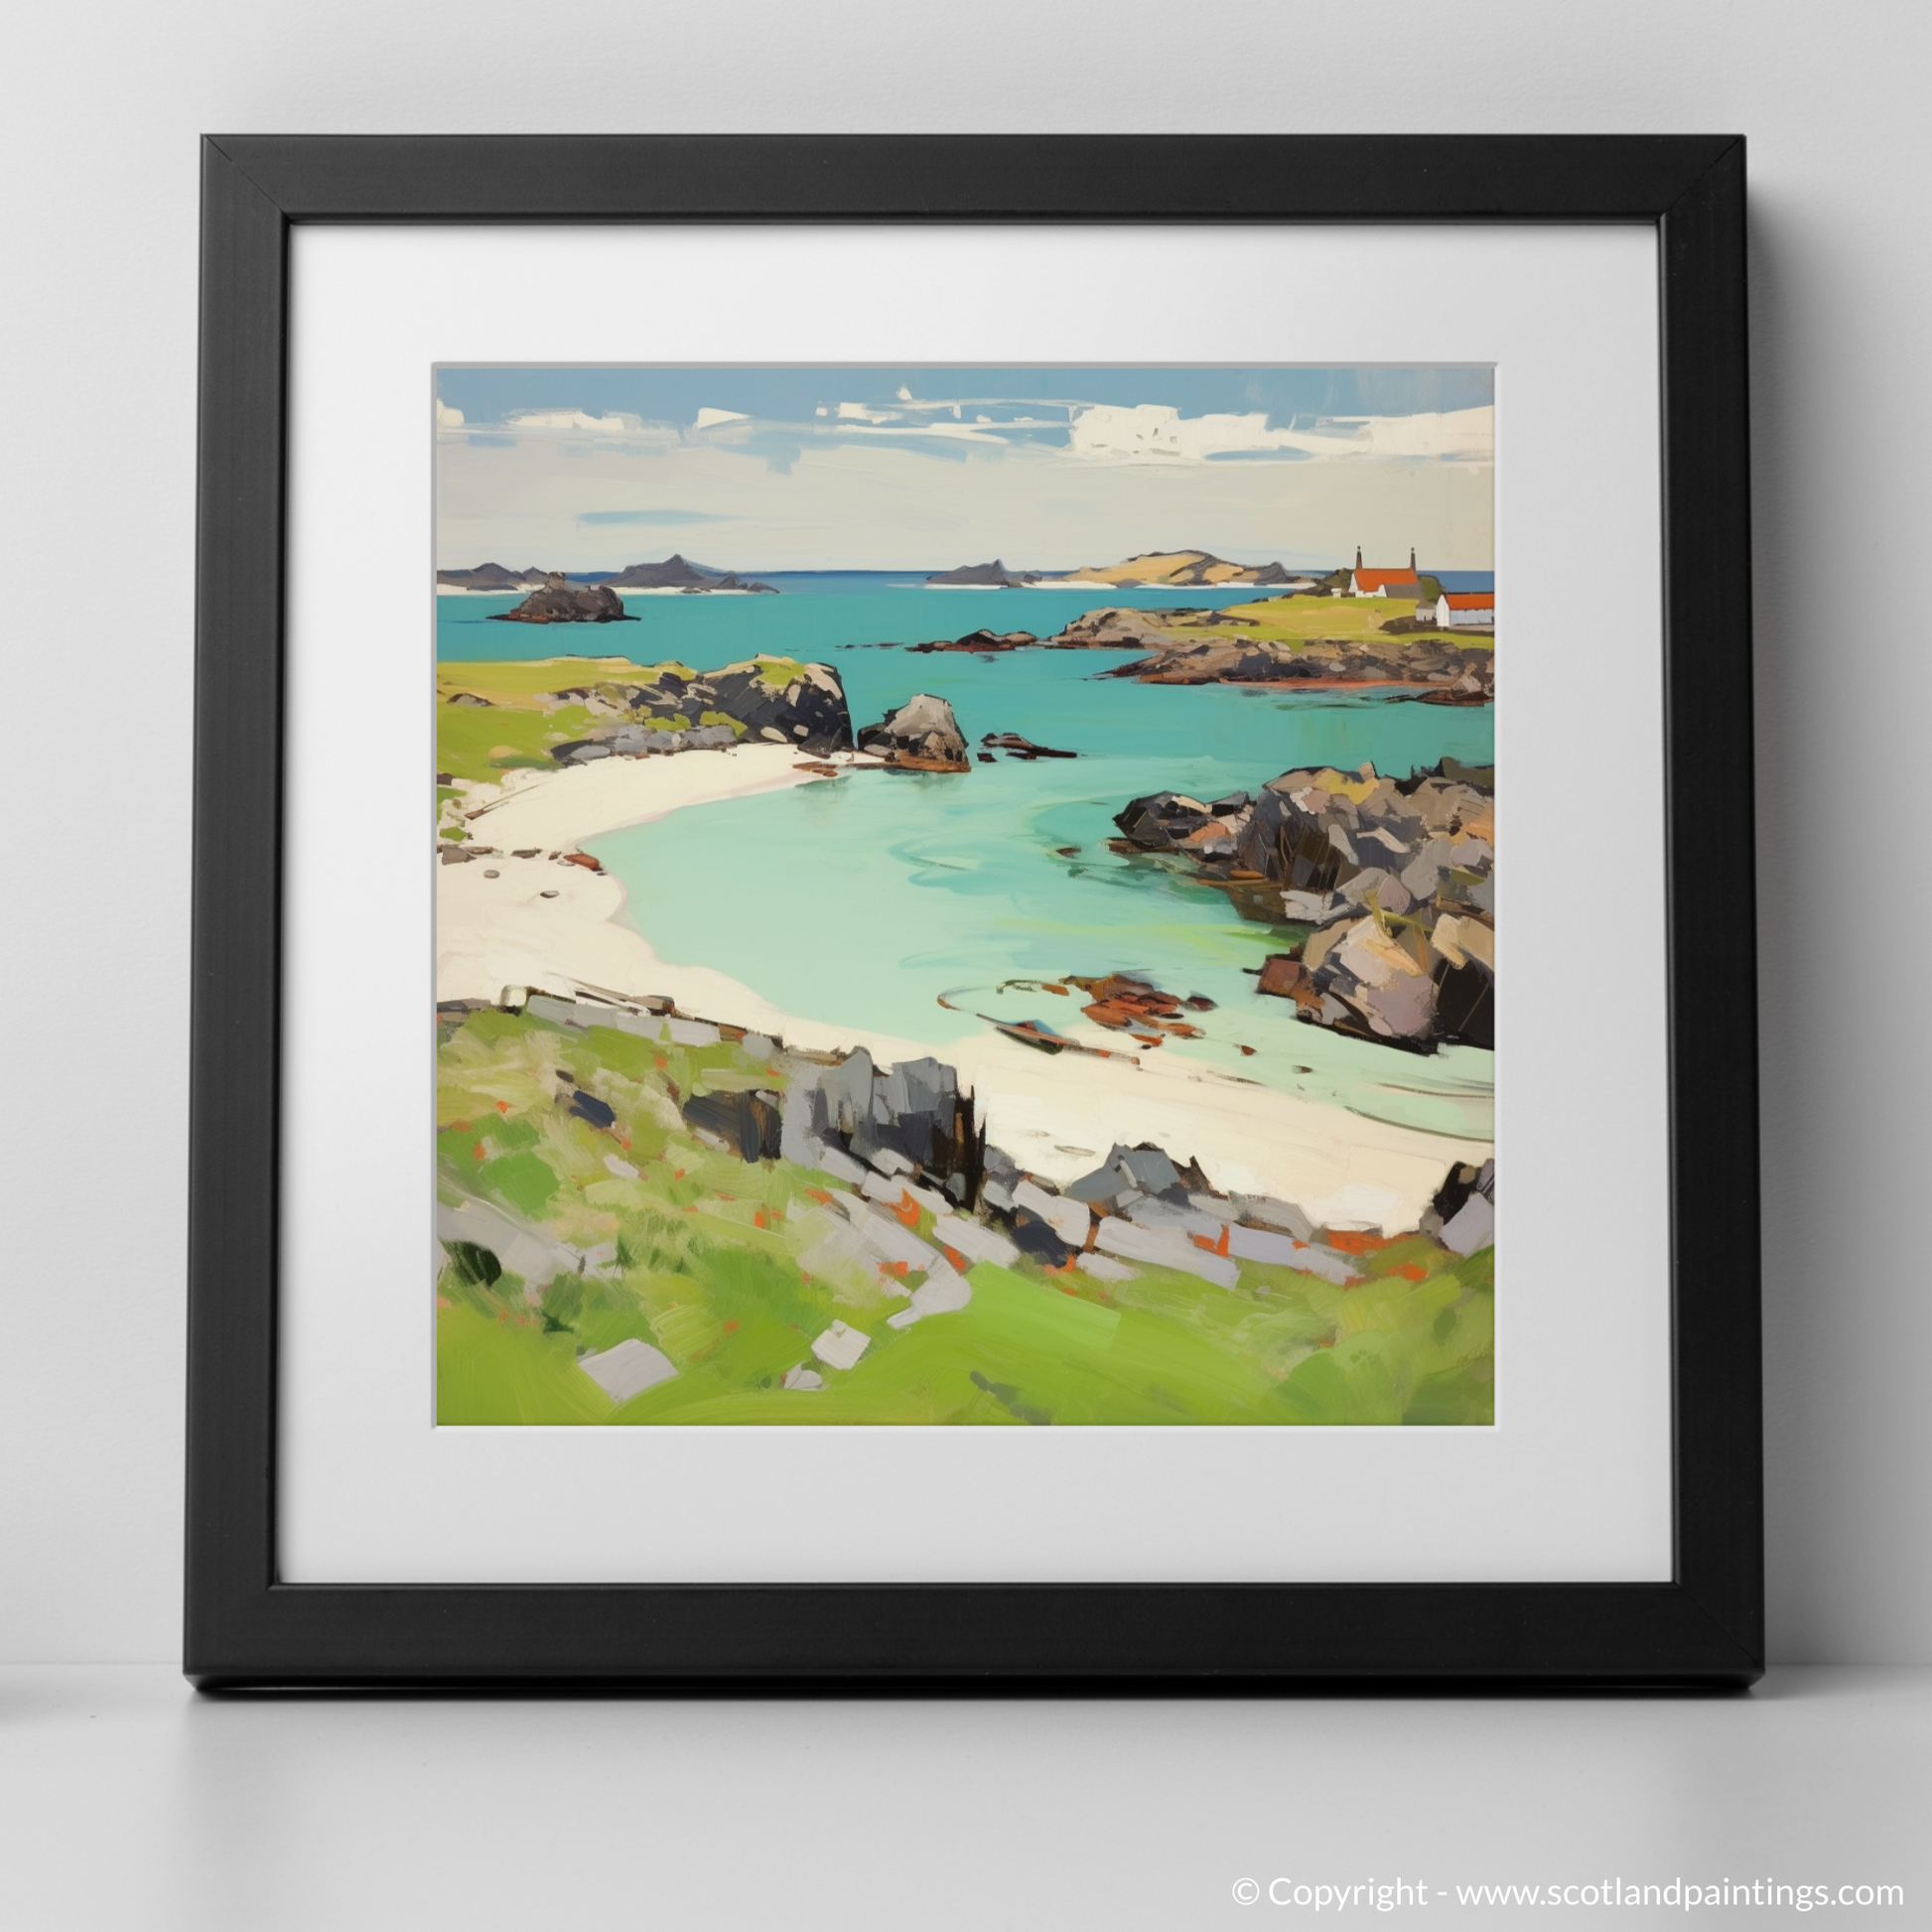 Art Print of Isle of Iona, Inner Hebrides with a black frame